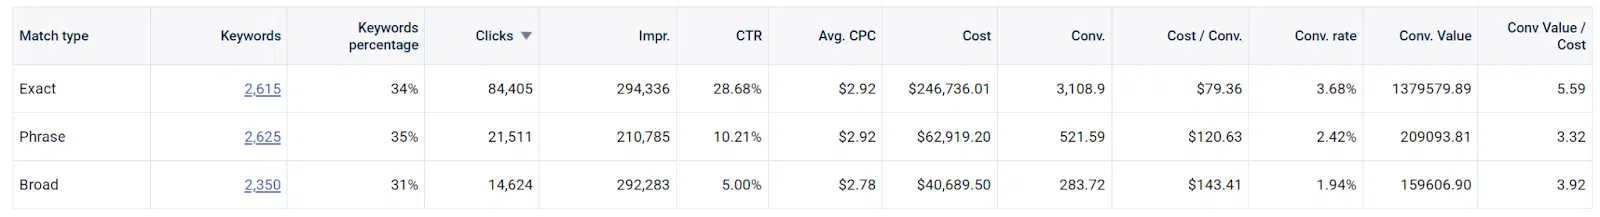 Google Ads match types performance compared